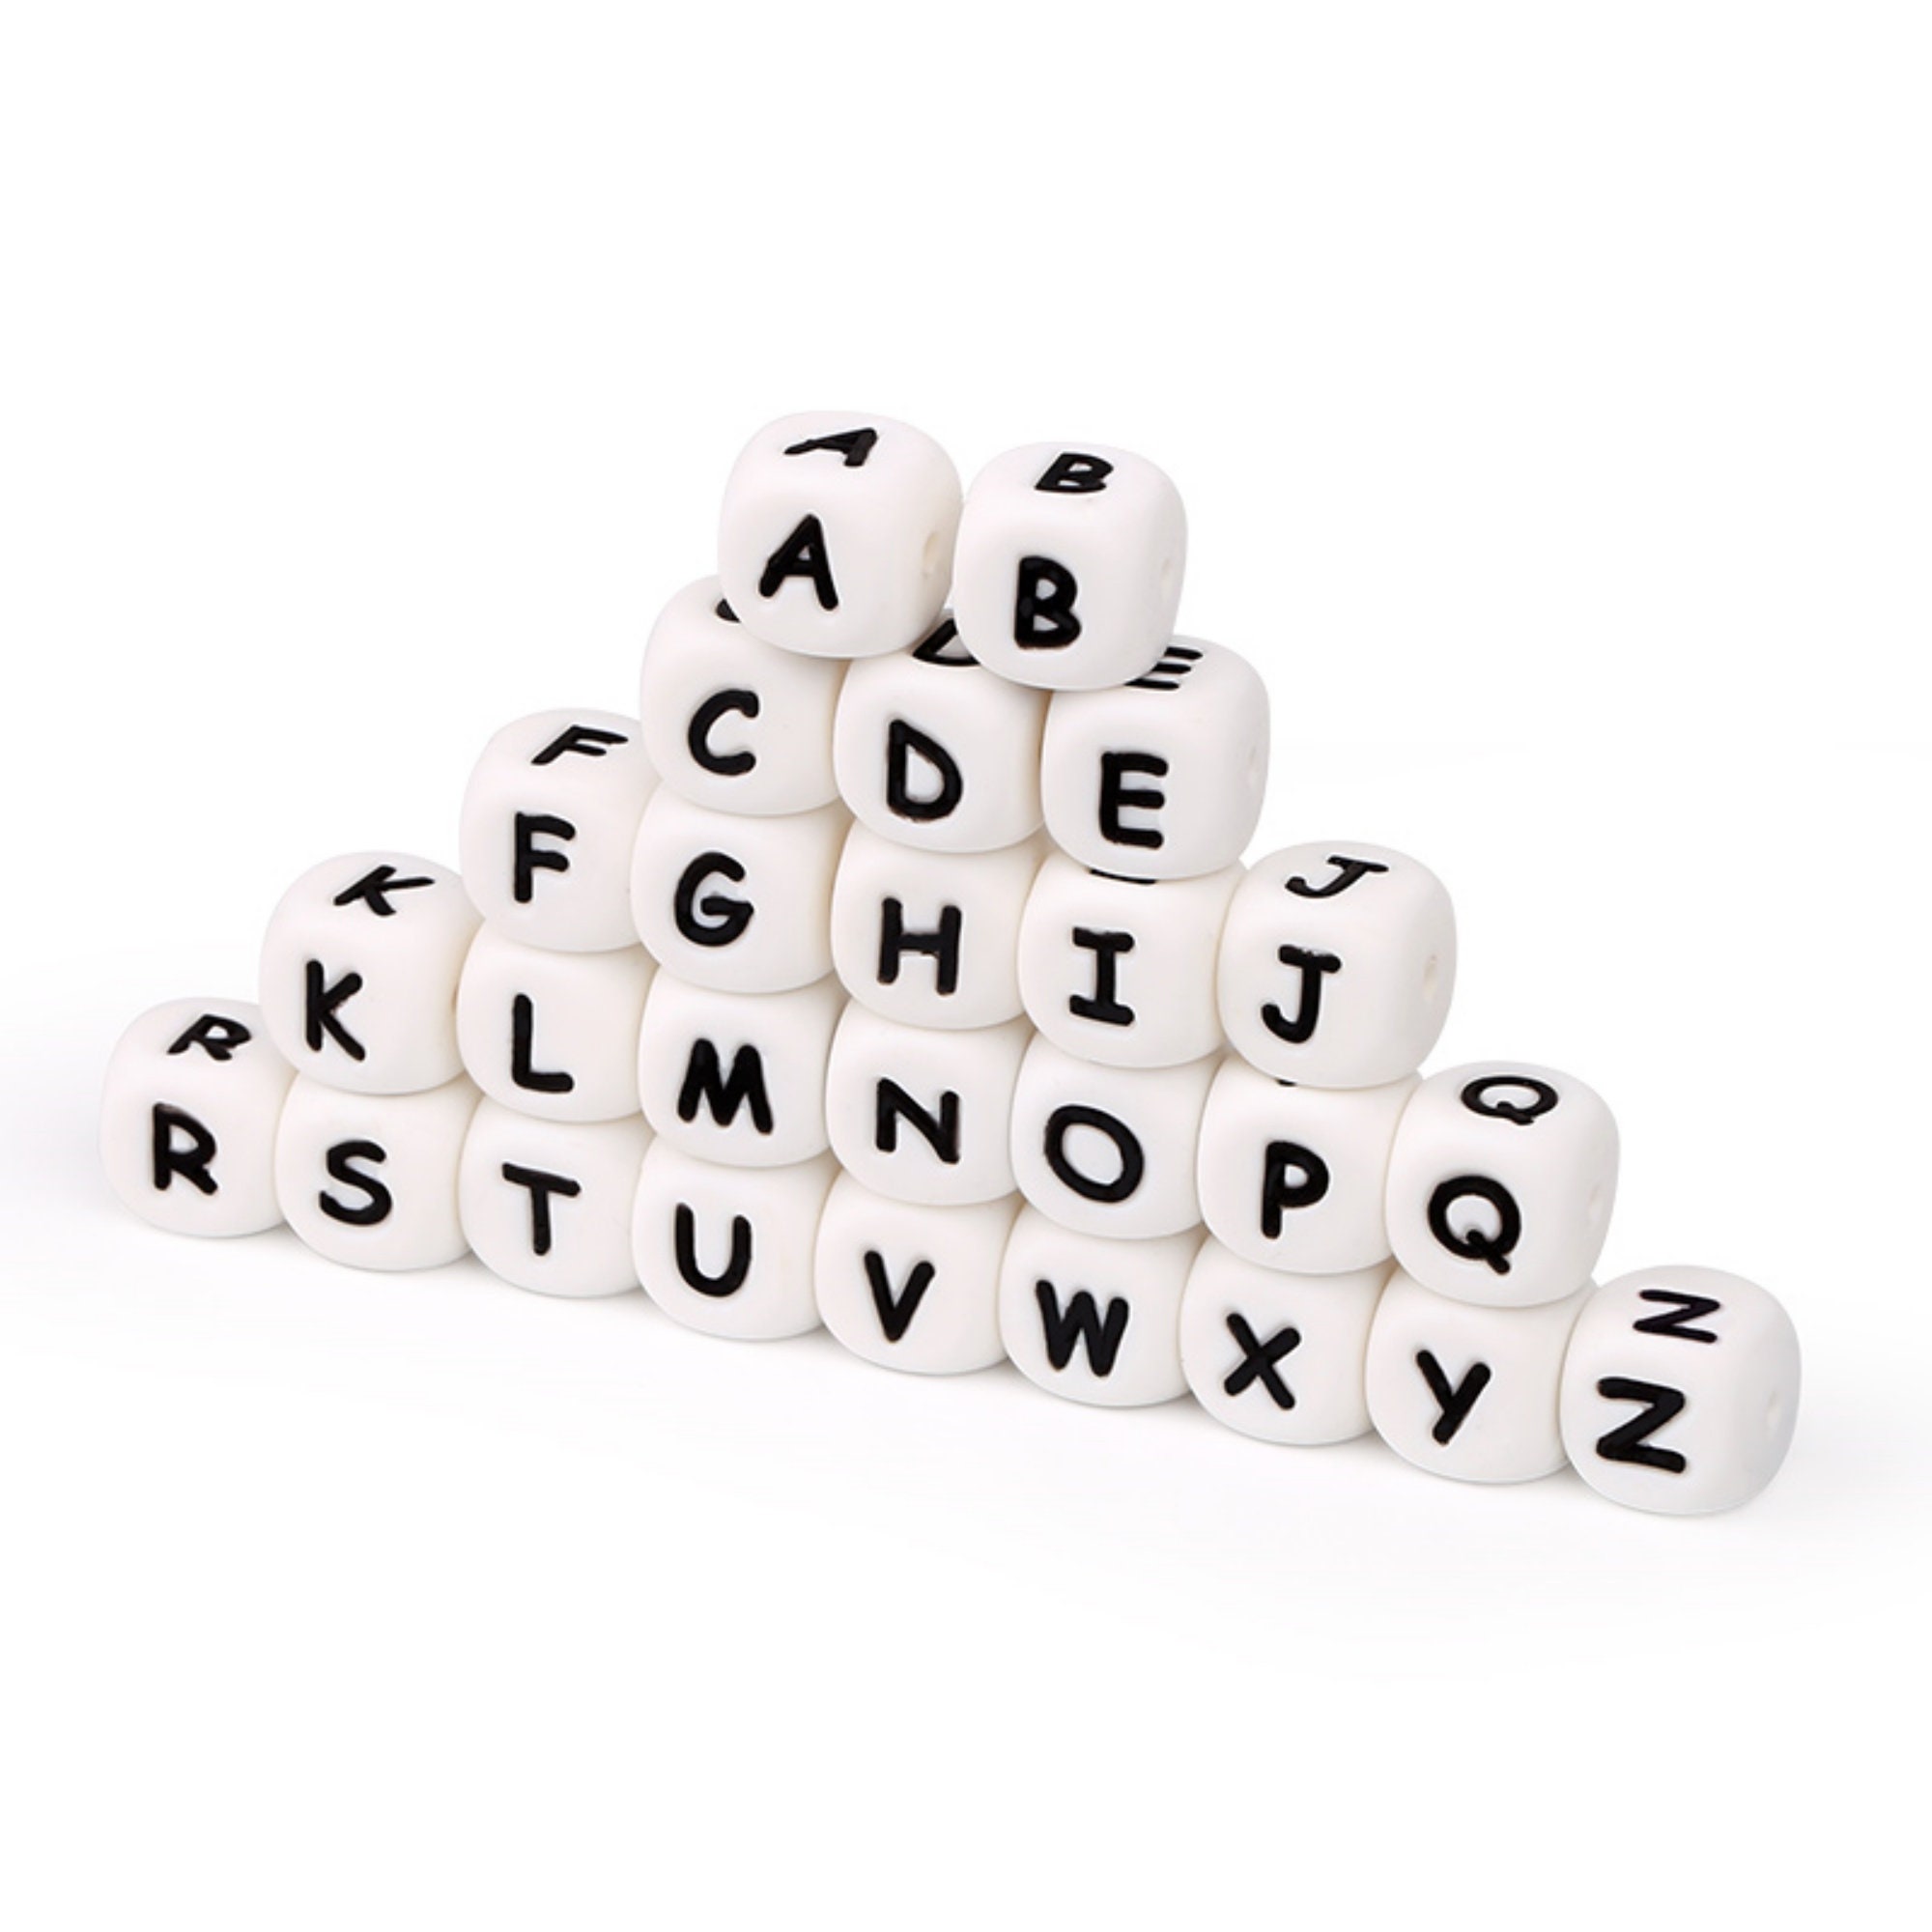 FASHEWELRY 10Pcs Cube Silicone Letter Beads 12x12x12mm Square Alphabet R